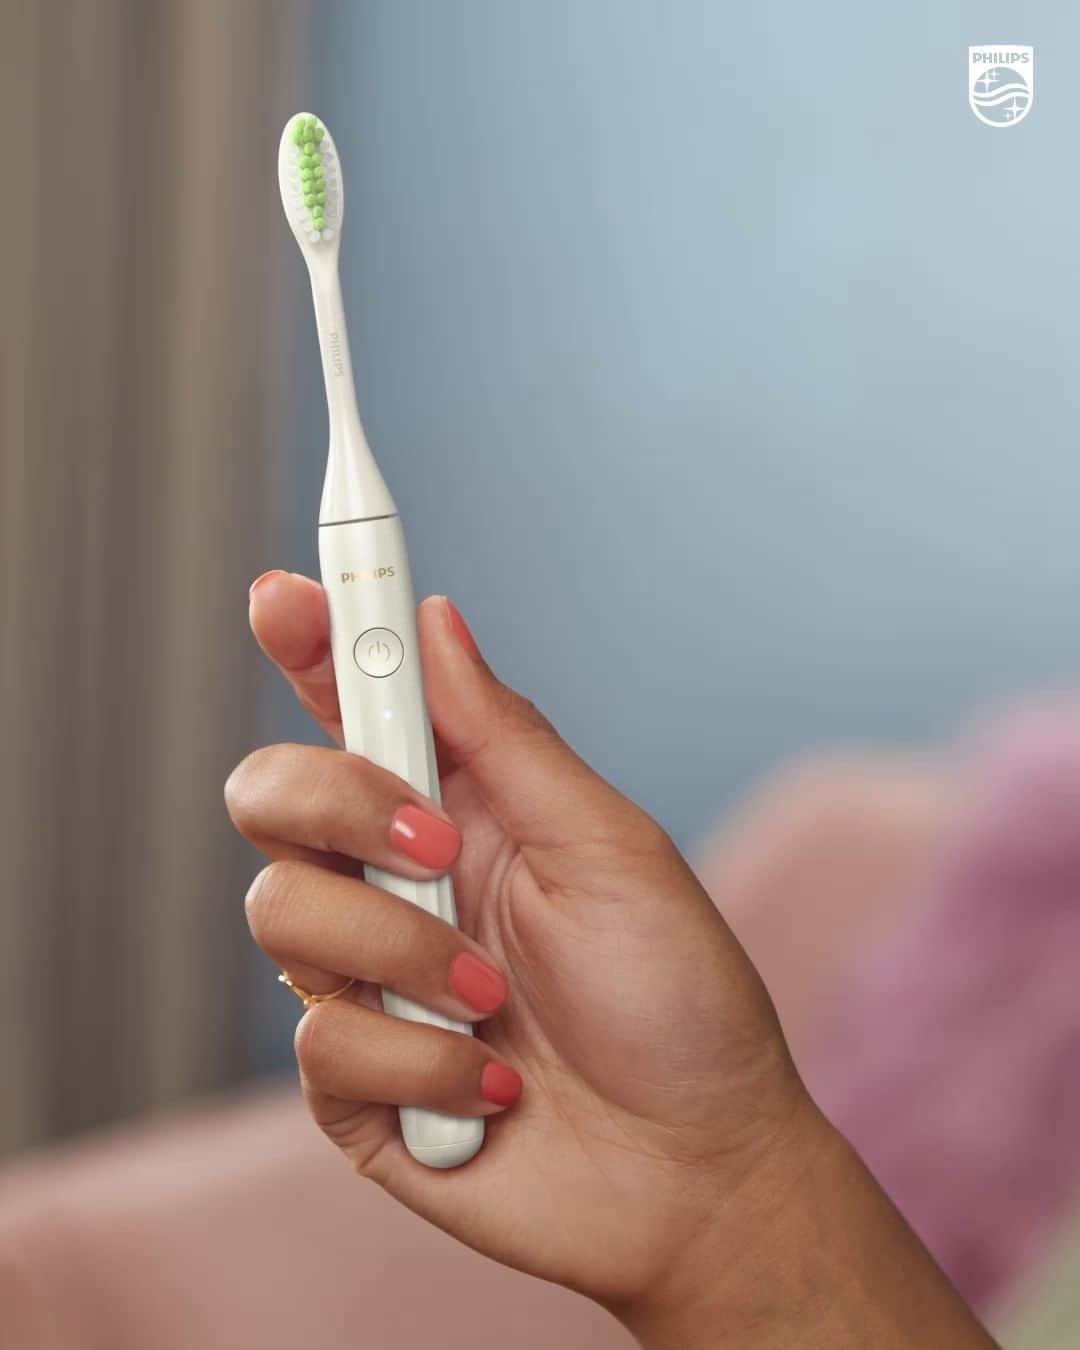 Philips Sonicareのインスタグラム：「Your brushing routine, made easier with Philips One by Sonicare’s 2-minute timer – the exact amount of time your dentist wants you to brush! 🙌   During these 2 minutes do you: listen to music, scroll on your phone, meditate, space out? Tell us below in the comments!   #PhilipsSonicare #HealthTips」